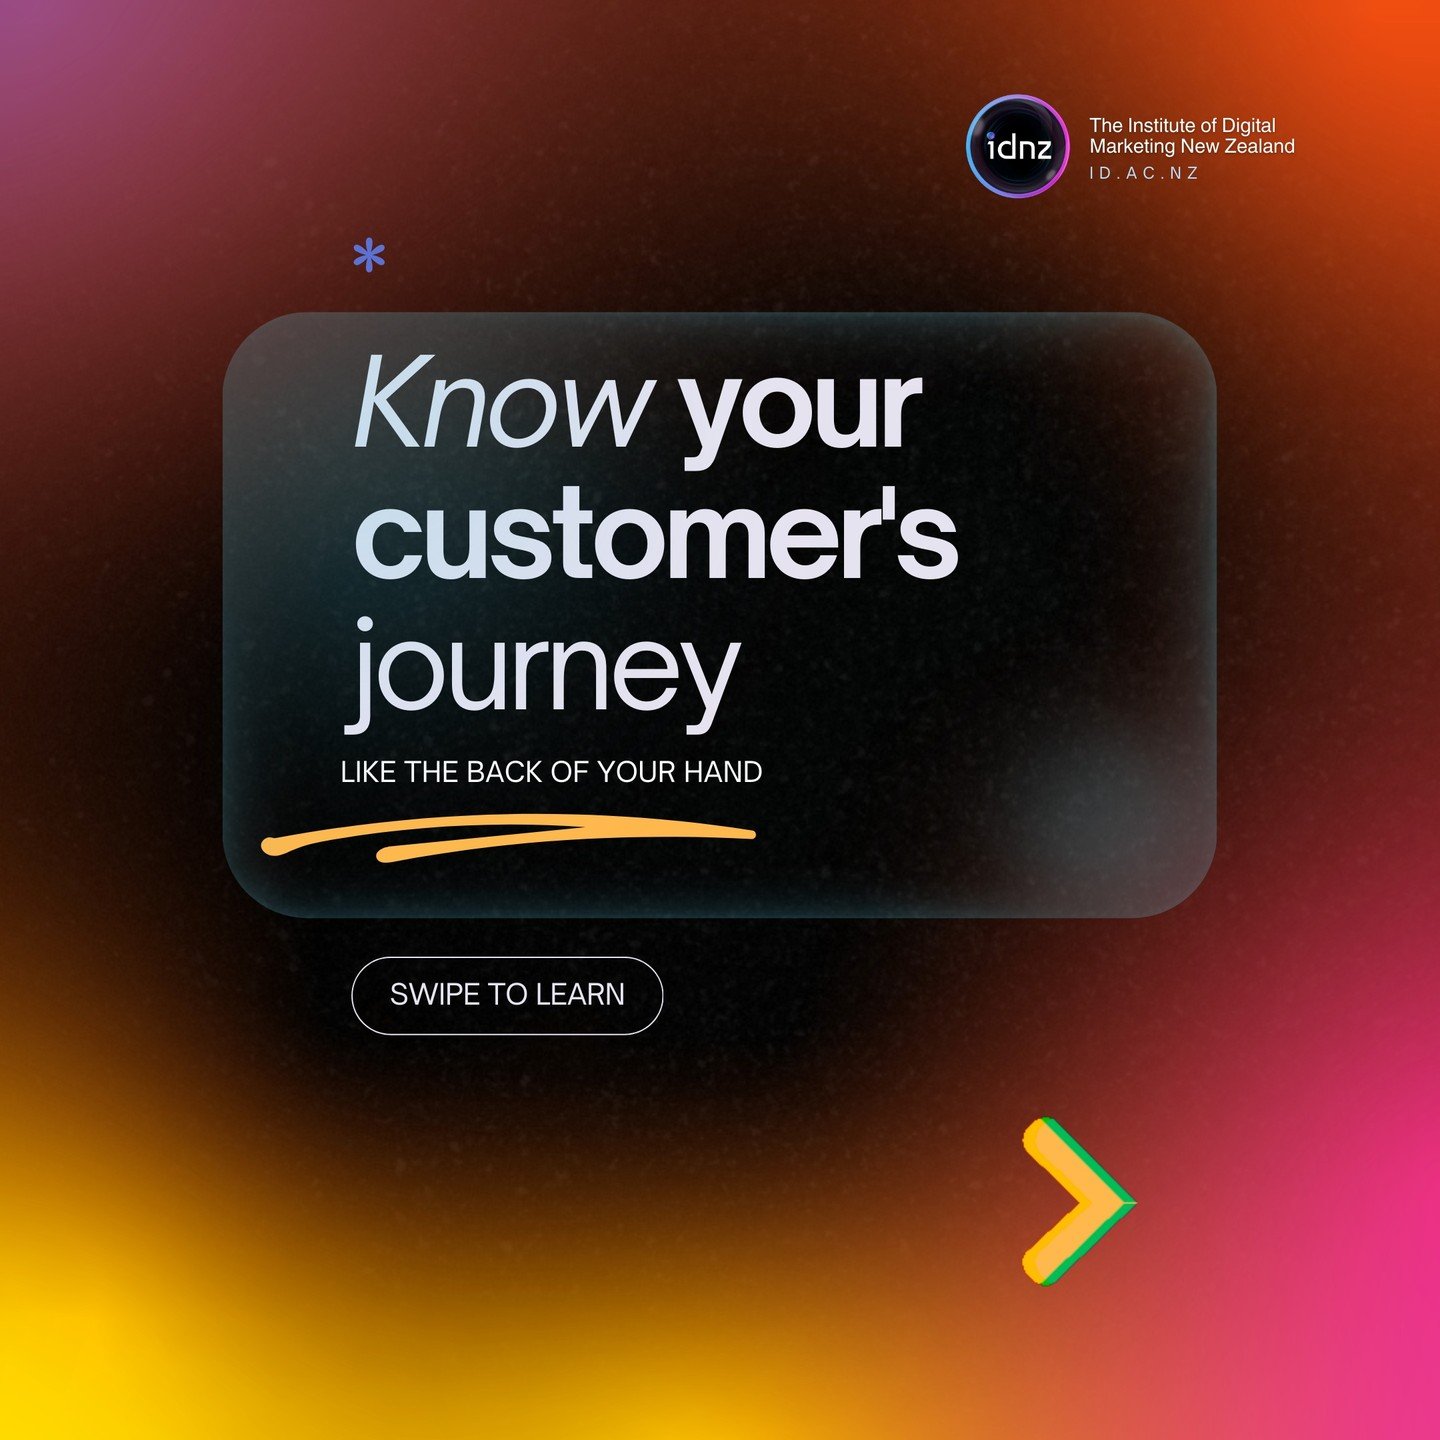 Feeling 😓 lost in the customer maze? You're not alone!

Customers today have endless choices, and it's crucial to make their journey through your brand clear and satisfying. Enter customer journey mapping! ️

By understanding their experience, from 